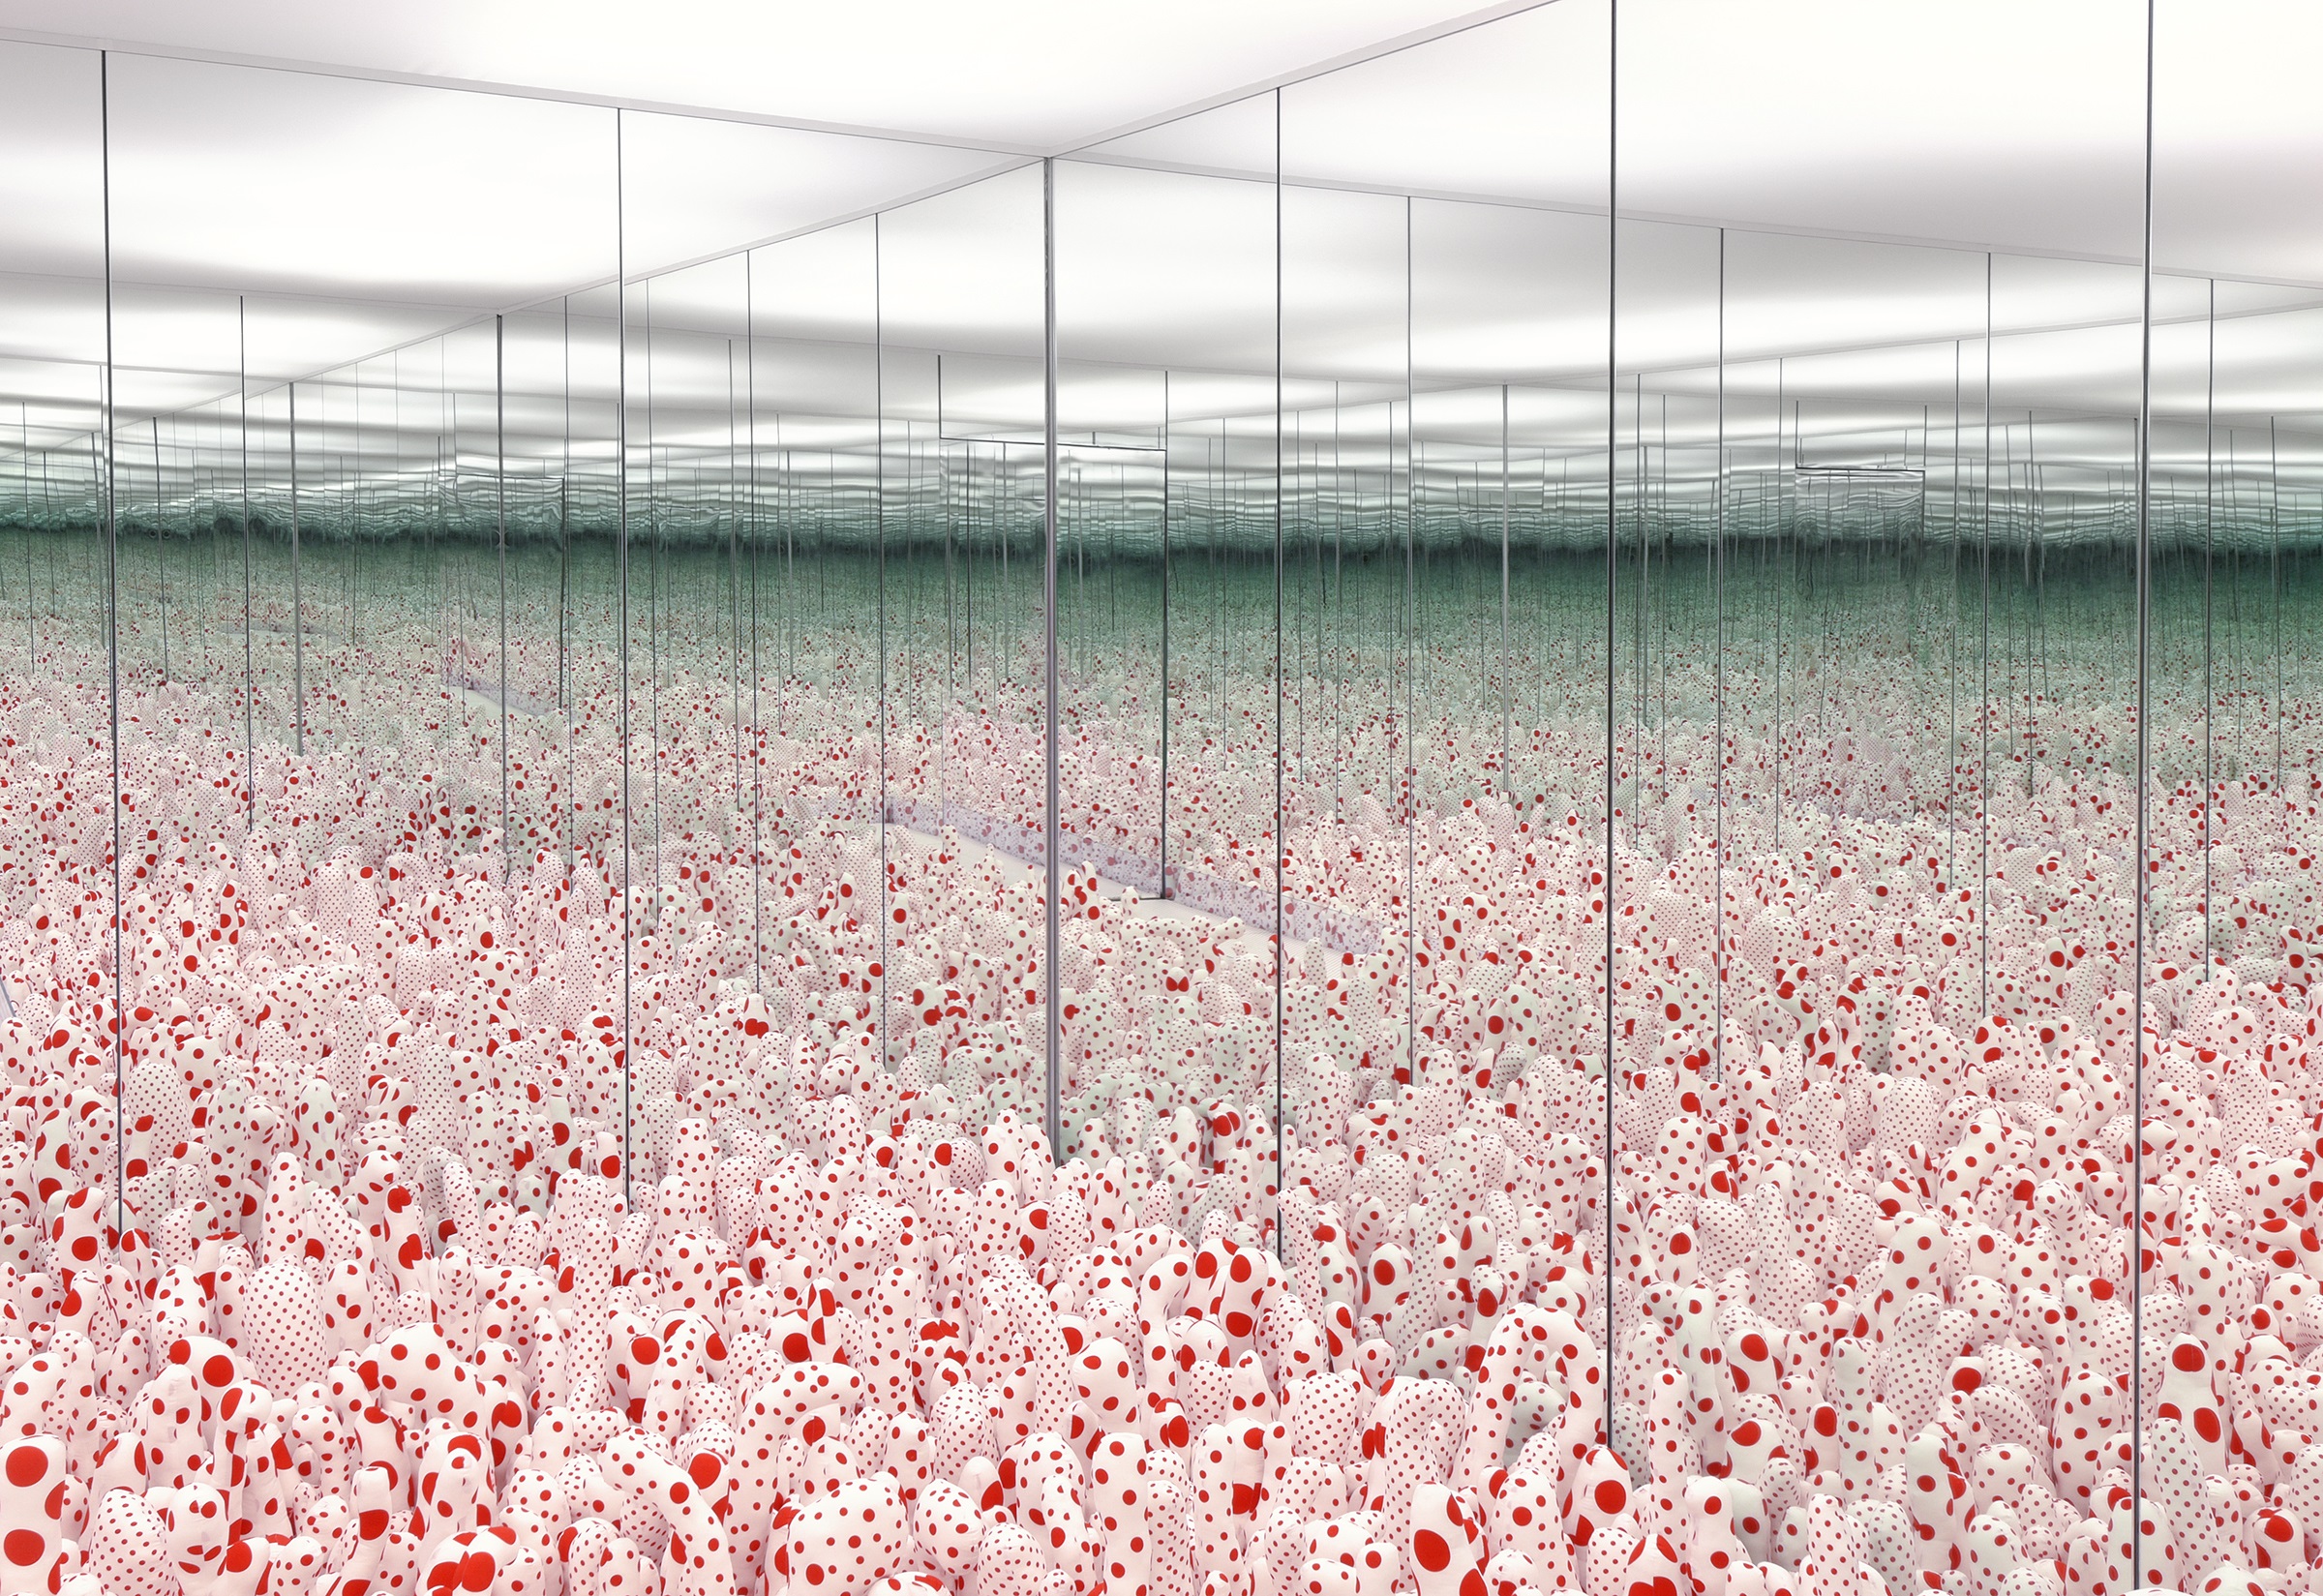 Inside one of Yayoi Kusama's Infinity Mirror Rooms, with mirror walls that reflect a floor of soft white and red polka-dotted sculptures on and on.